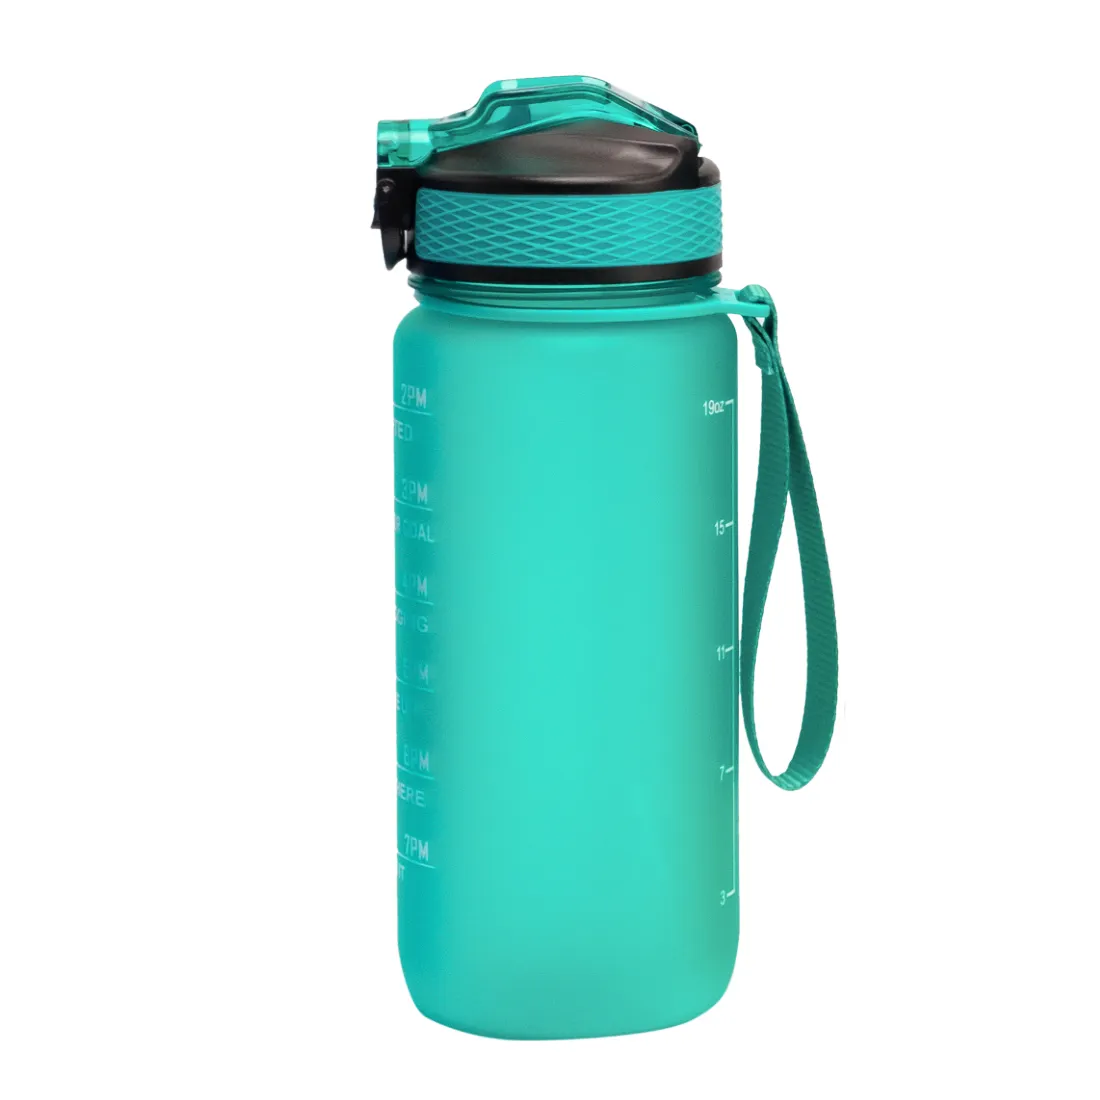 Wholesale 600 ml BPA-free fitness water bottle outdoor running sports plastic water bottle with time marker